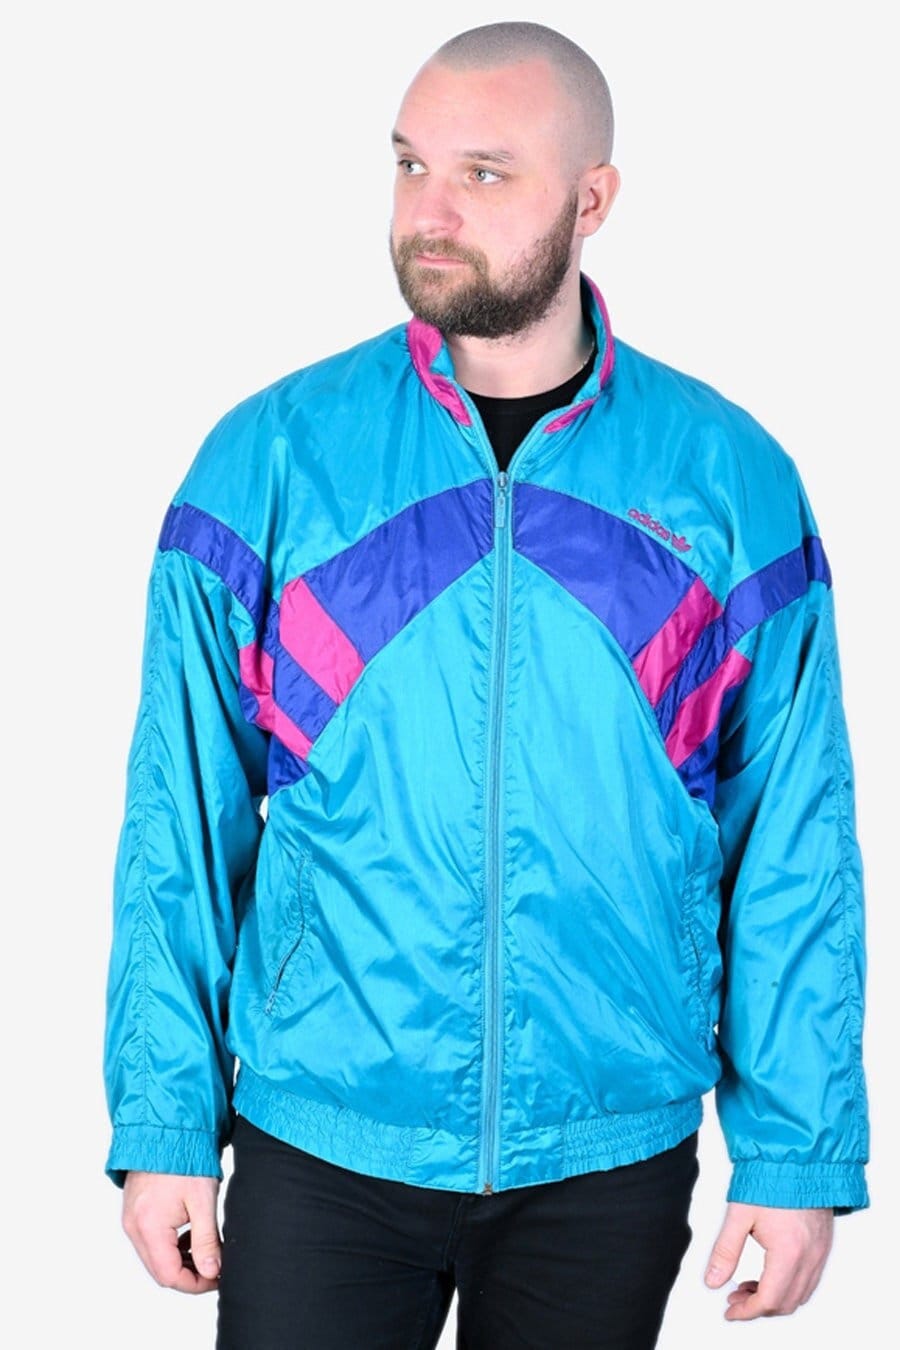 Gaseoso Hermanos color 1980's Adidas Shell Suit Jacket Size XL - Etsy